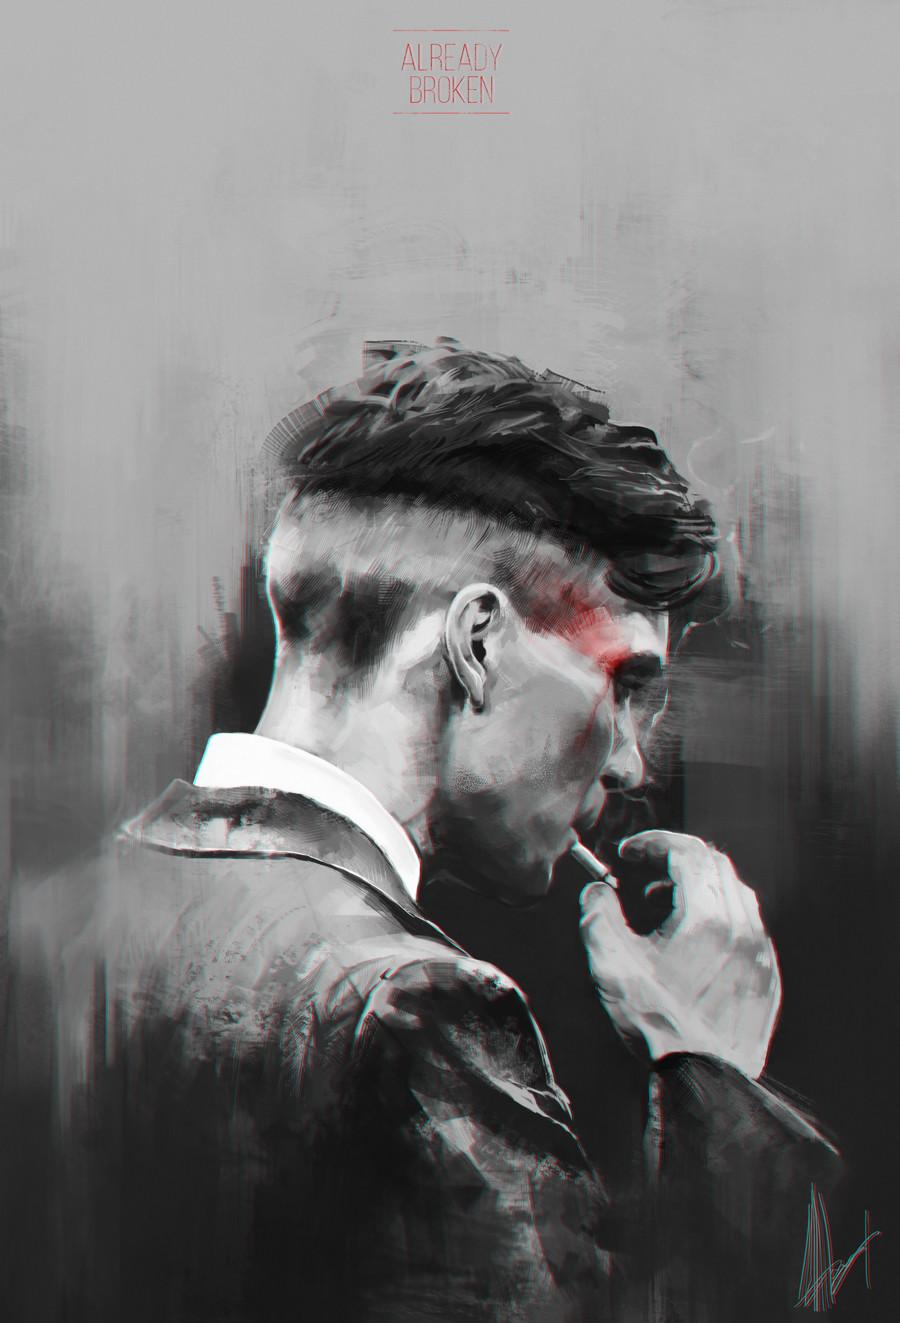 Thomas Shelby Wallpapers